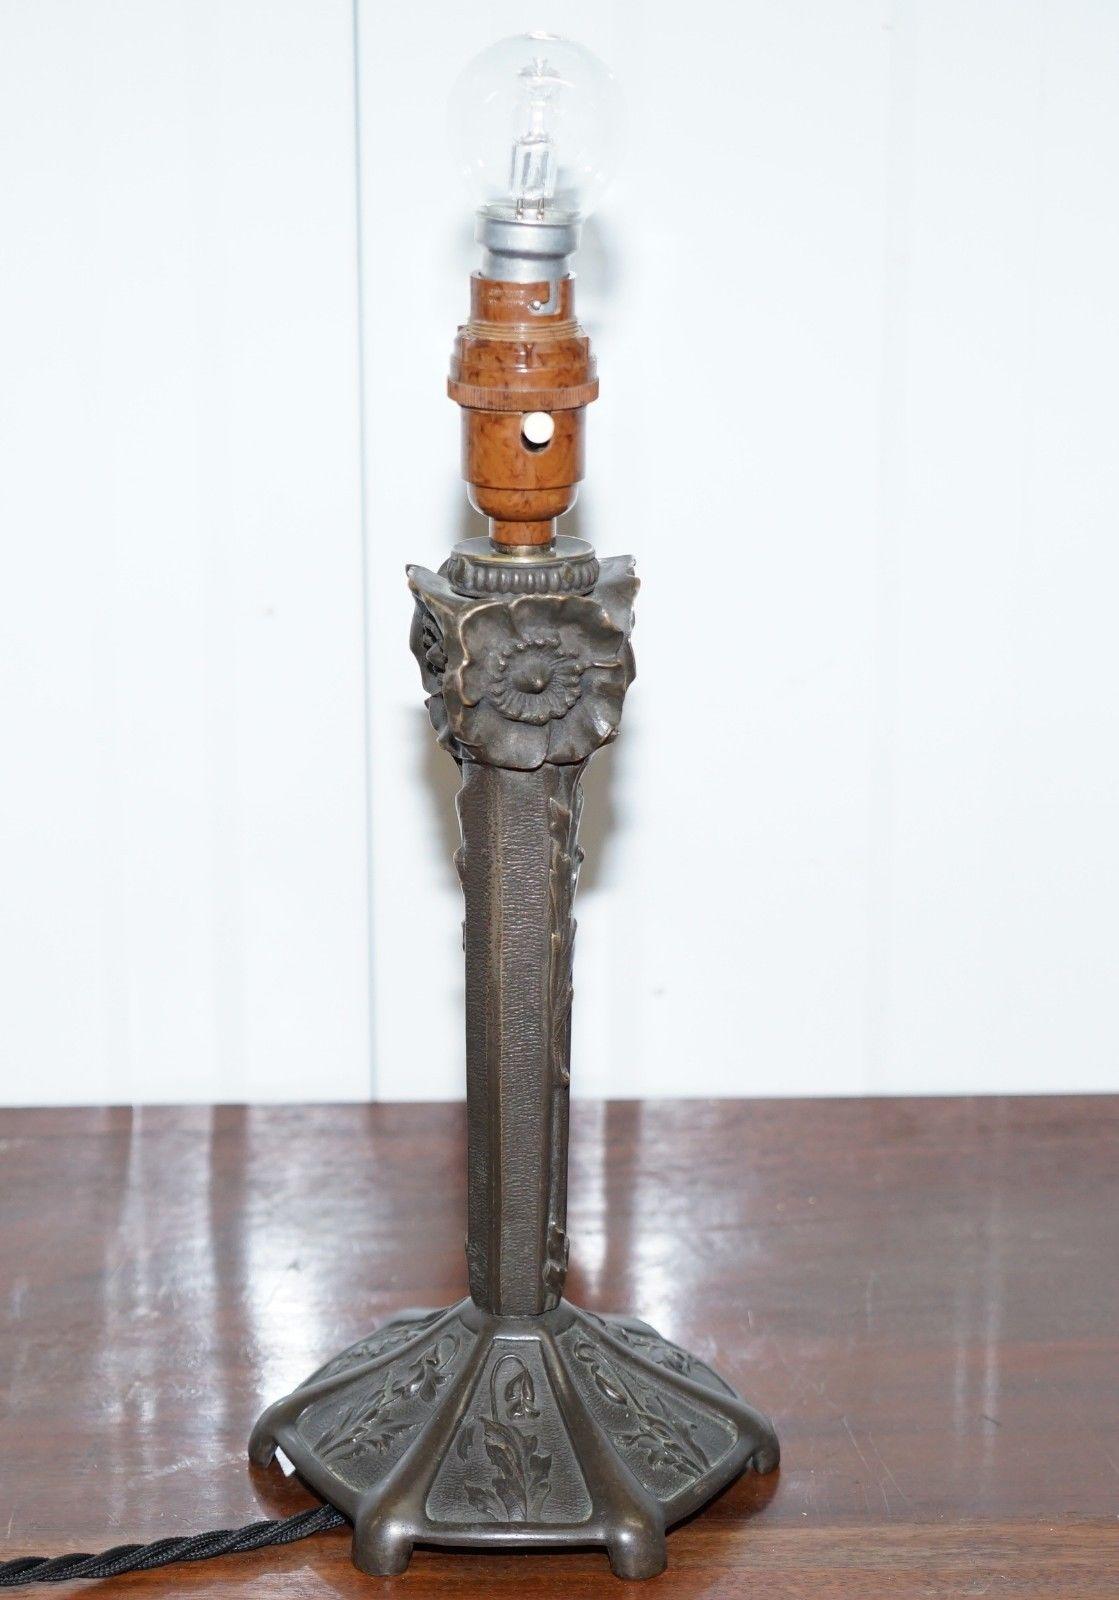 19th Century Stunning Bronze Floral Table Lamp with Burr Walnut Affect Bakelite Switch